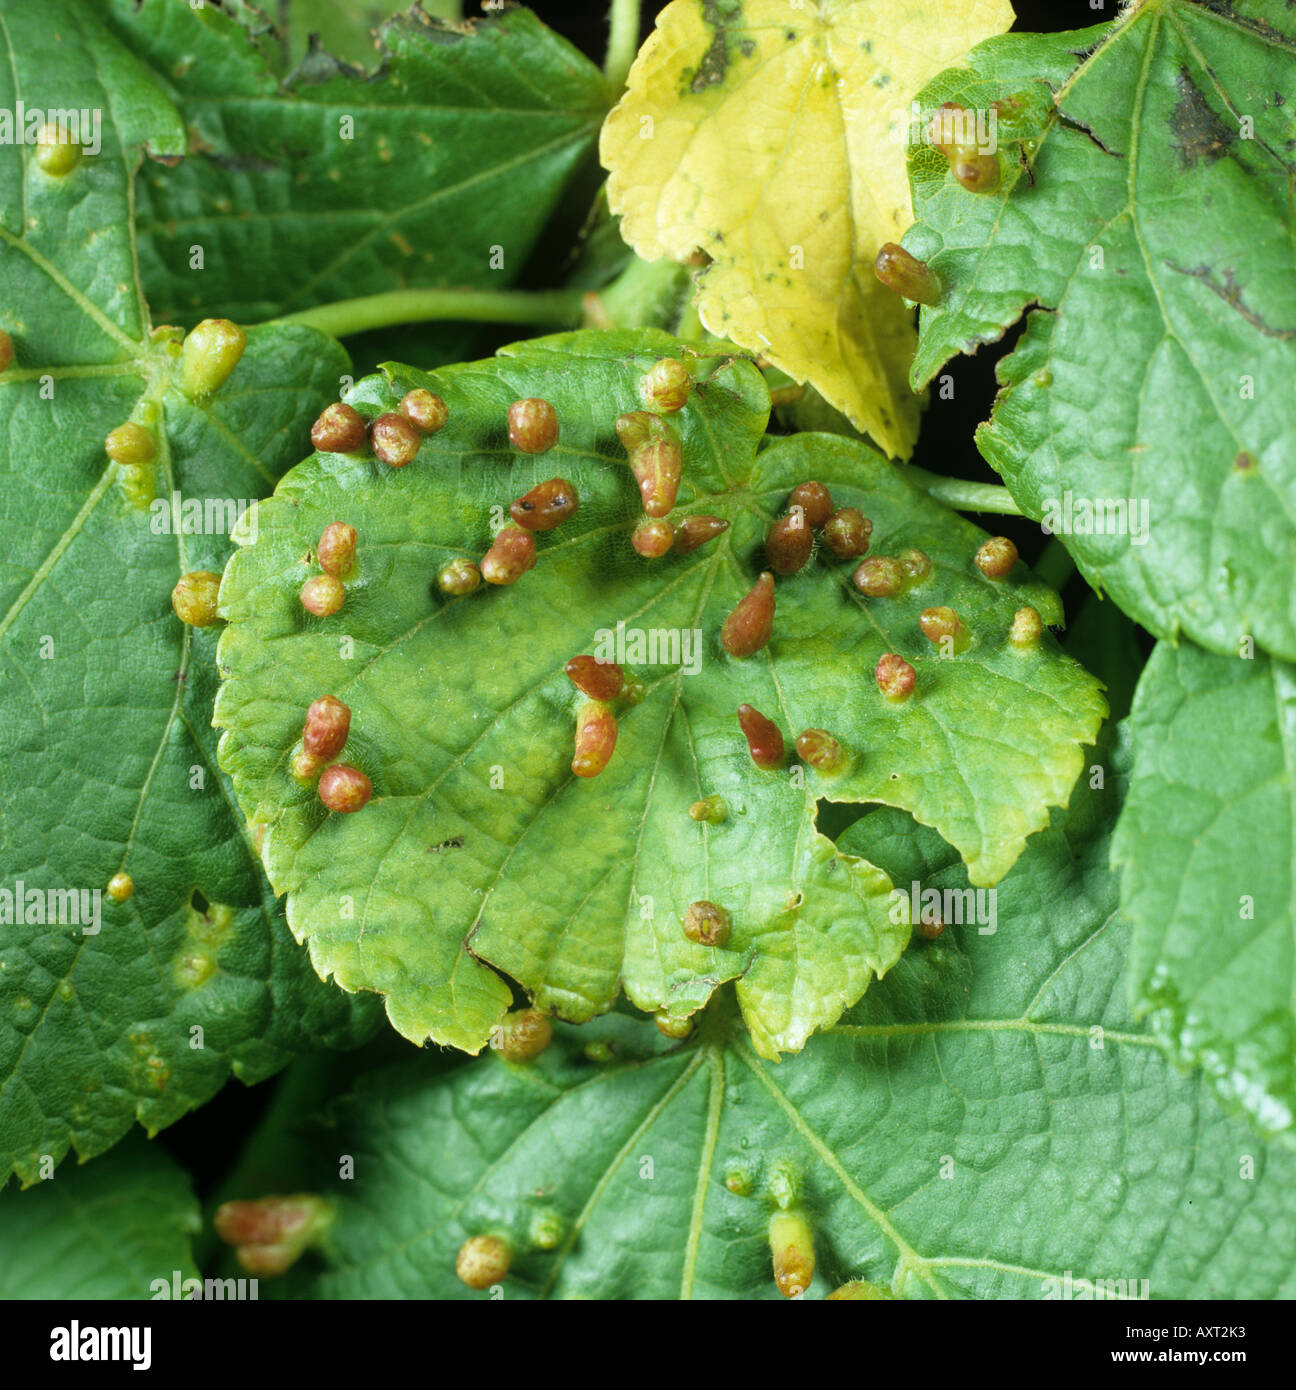 Lime nail gall mite Eriophyes tiliae galls on lime Tilia platyphyllos leaf Stock Photo